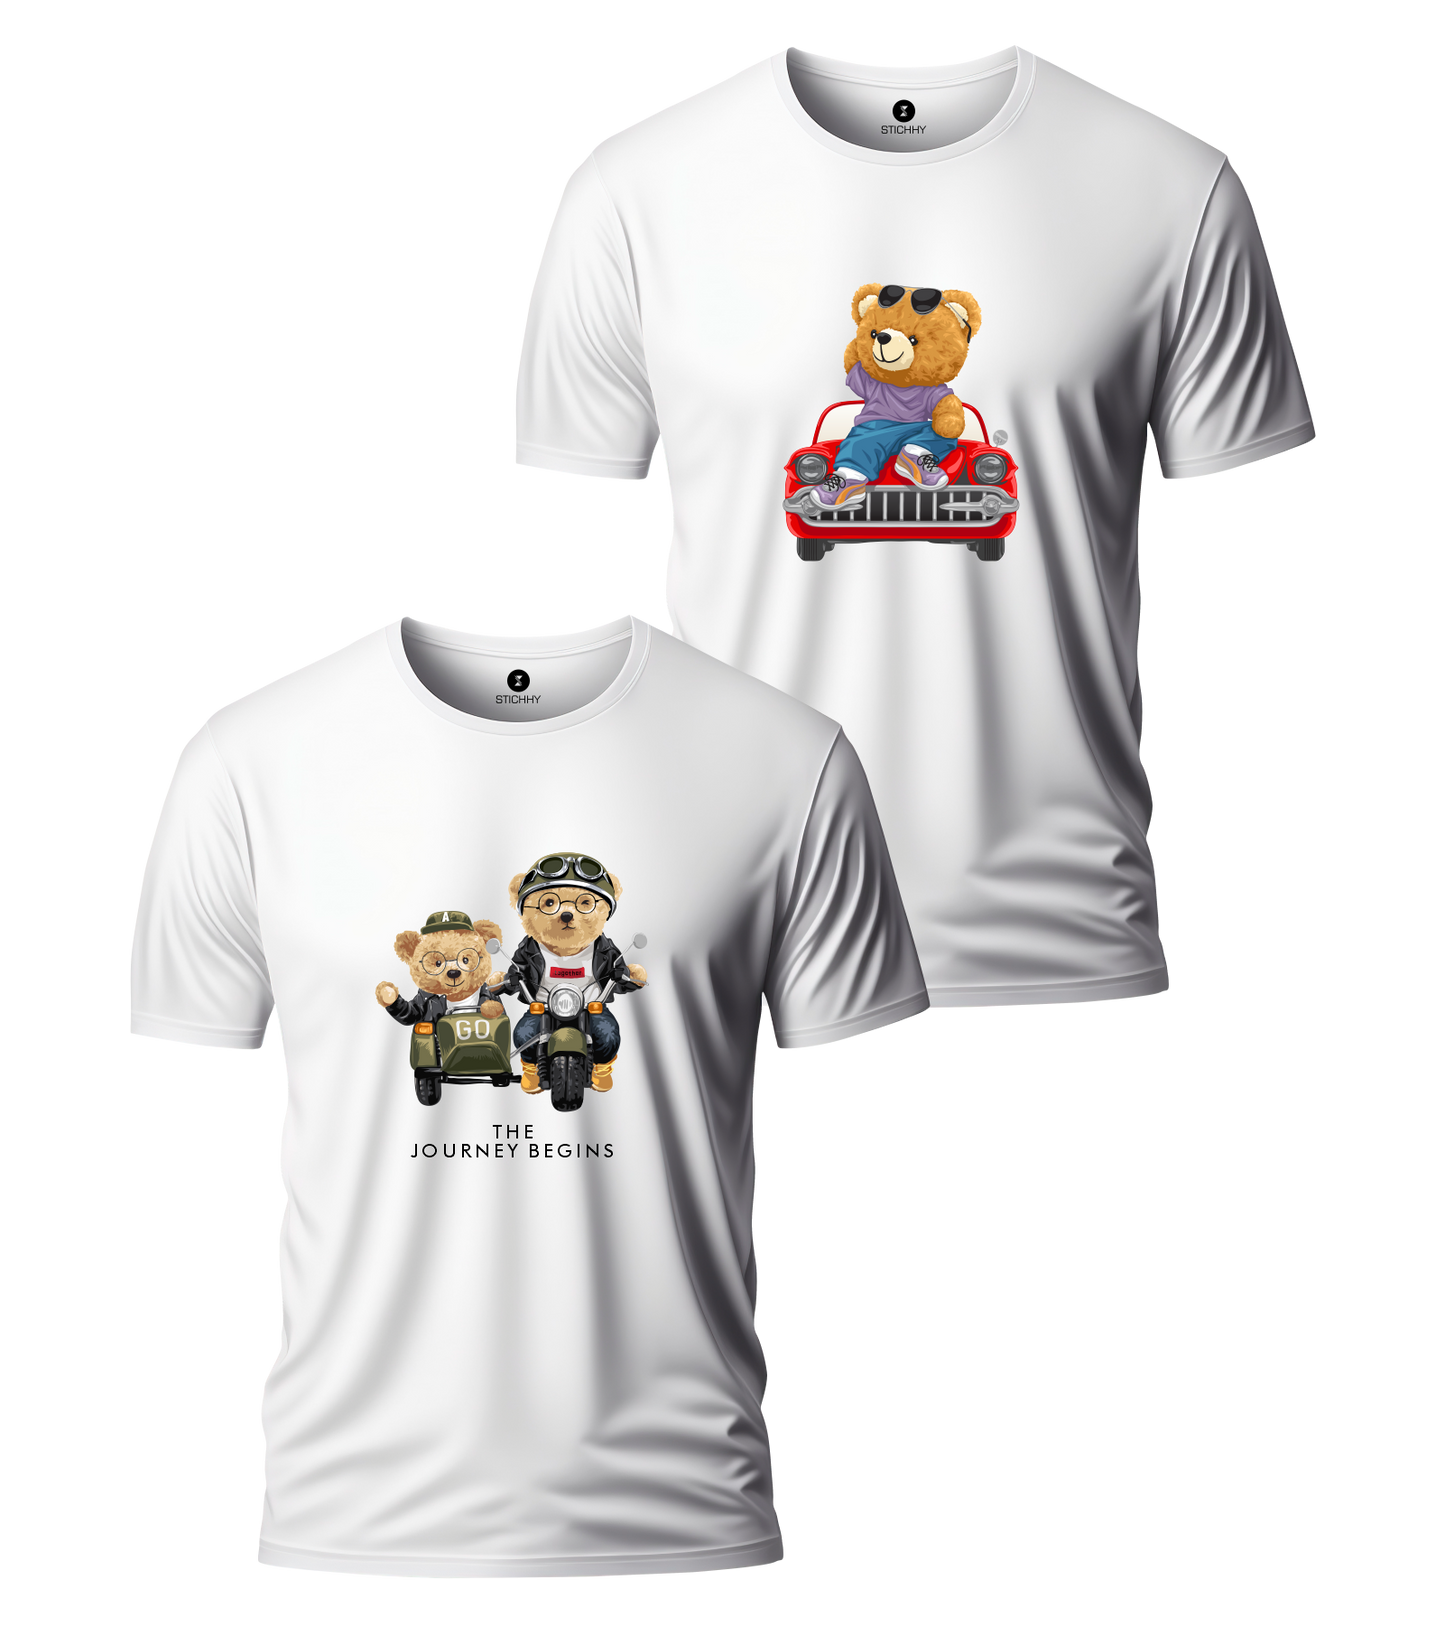 JAY VIRU & TADDY WITH CAR T-SHIRT BUY 1 GET 1 FREE